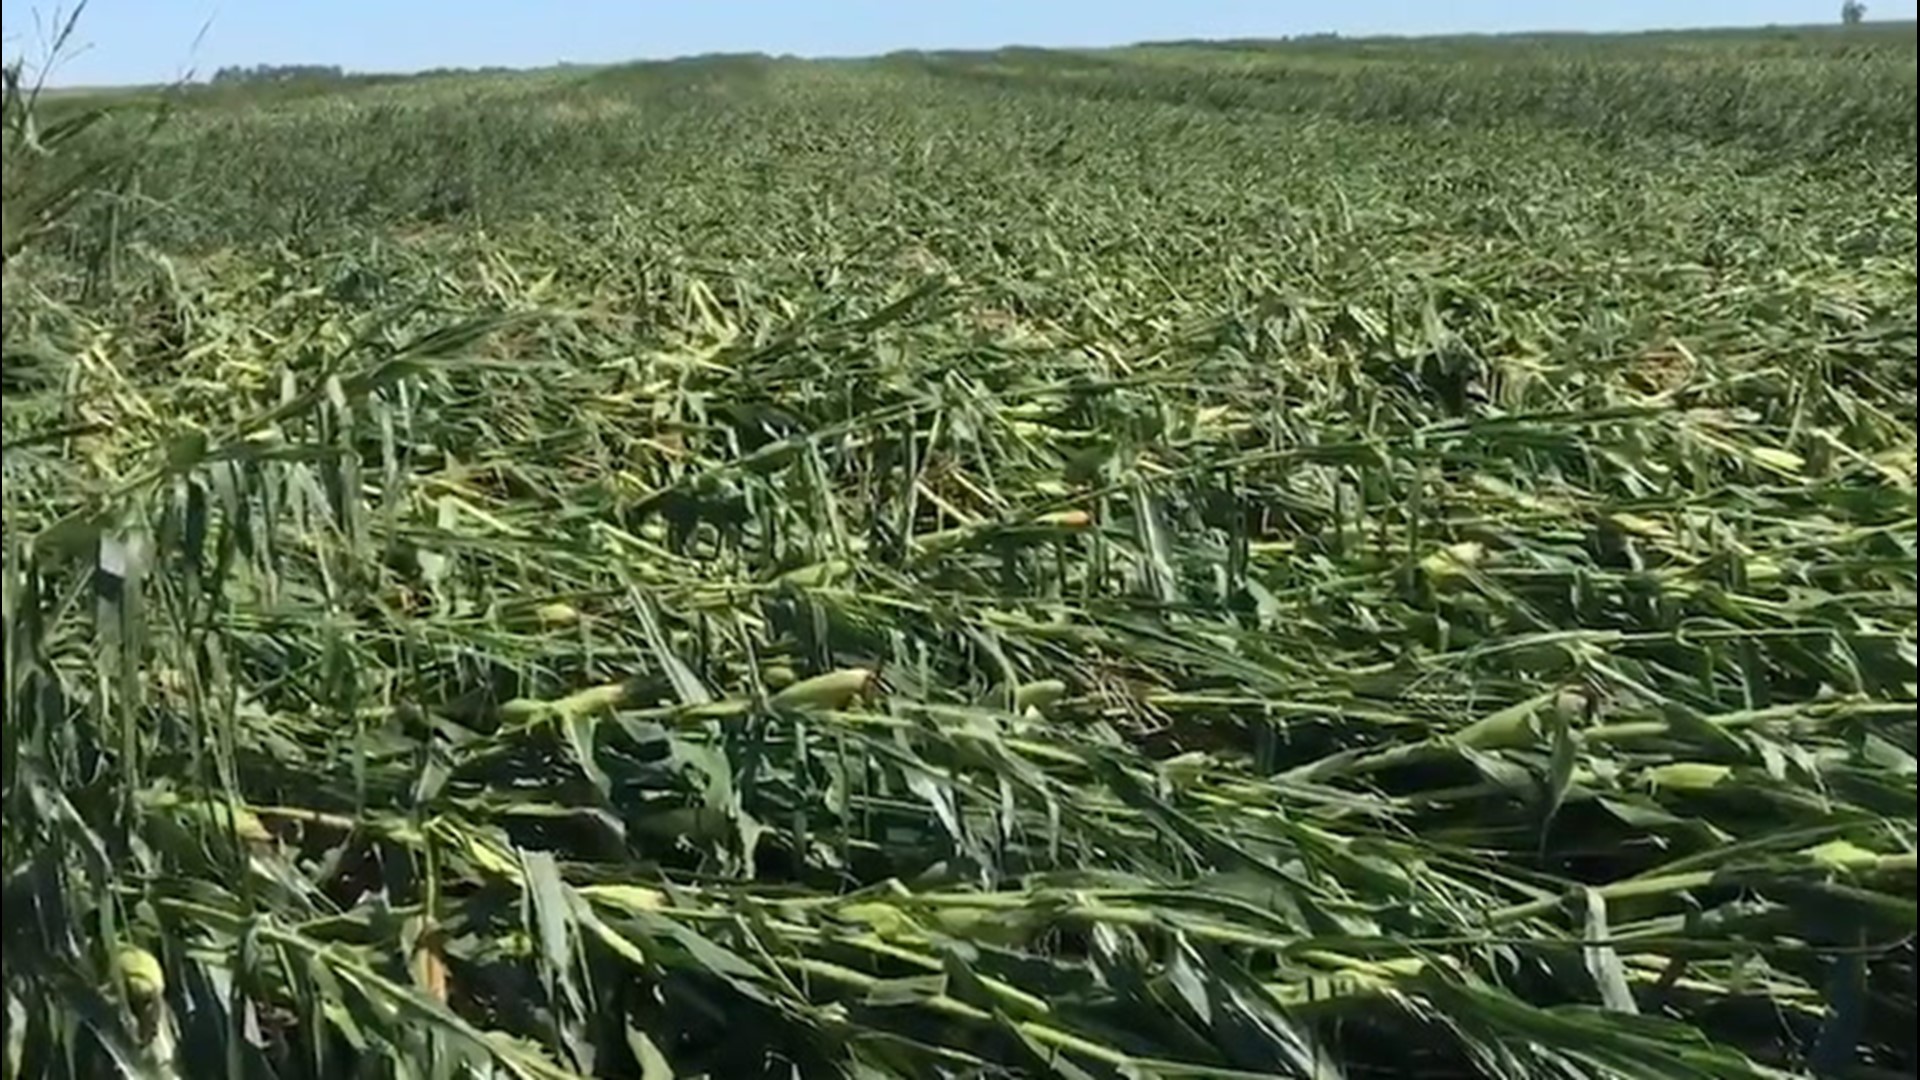 Farmers are surveying the damage to their crops in Iowa, Illinois and Indiana after a powerful line of severe storms blew through the region on Aug. 10.